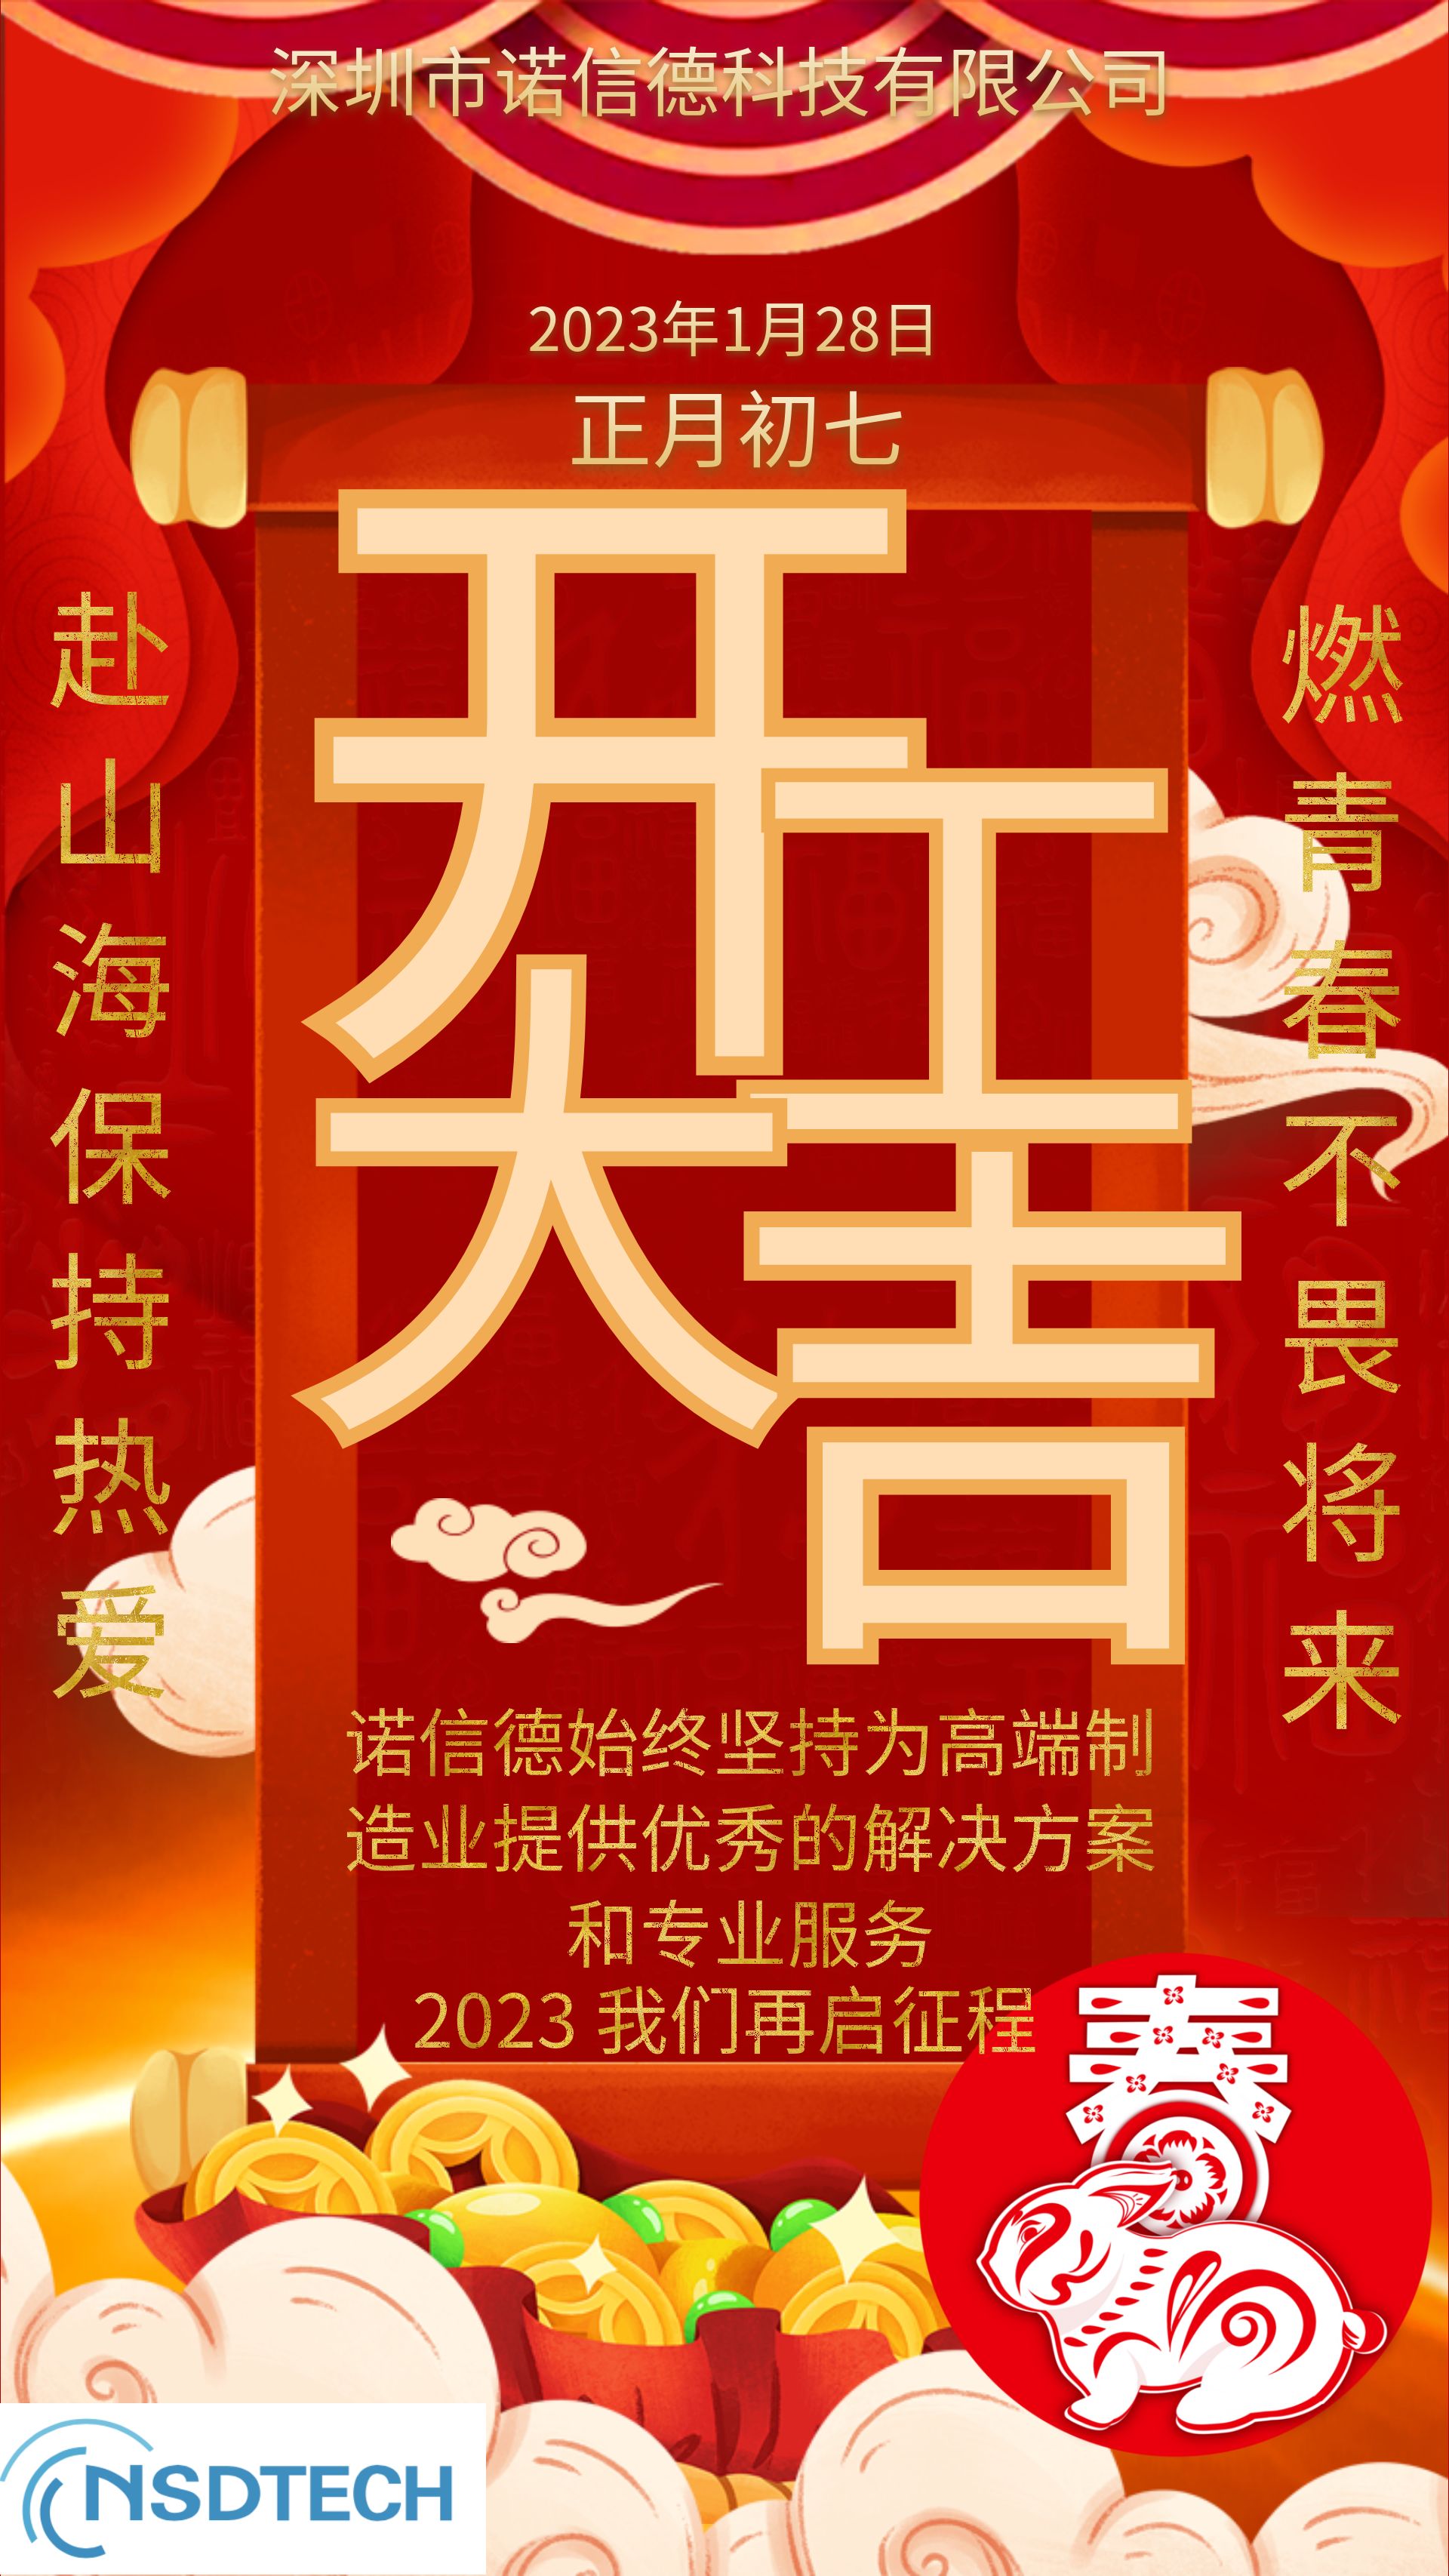 On the seventh day of the lunar new year, we will start construction and have good luck